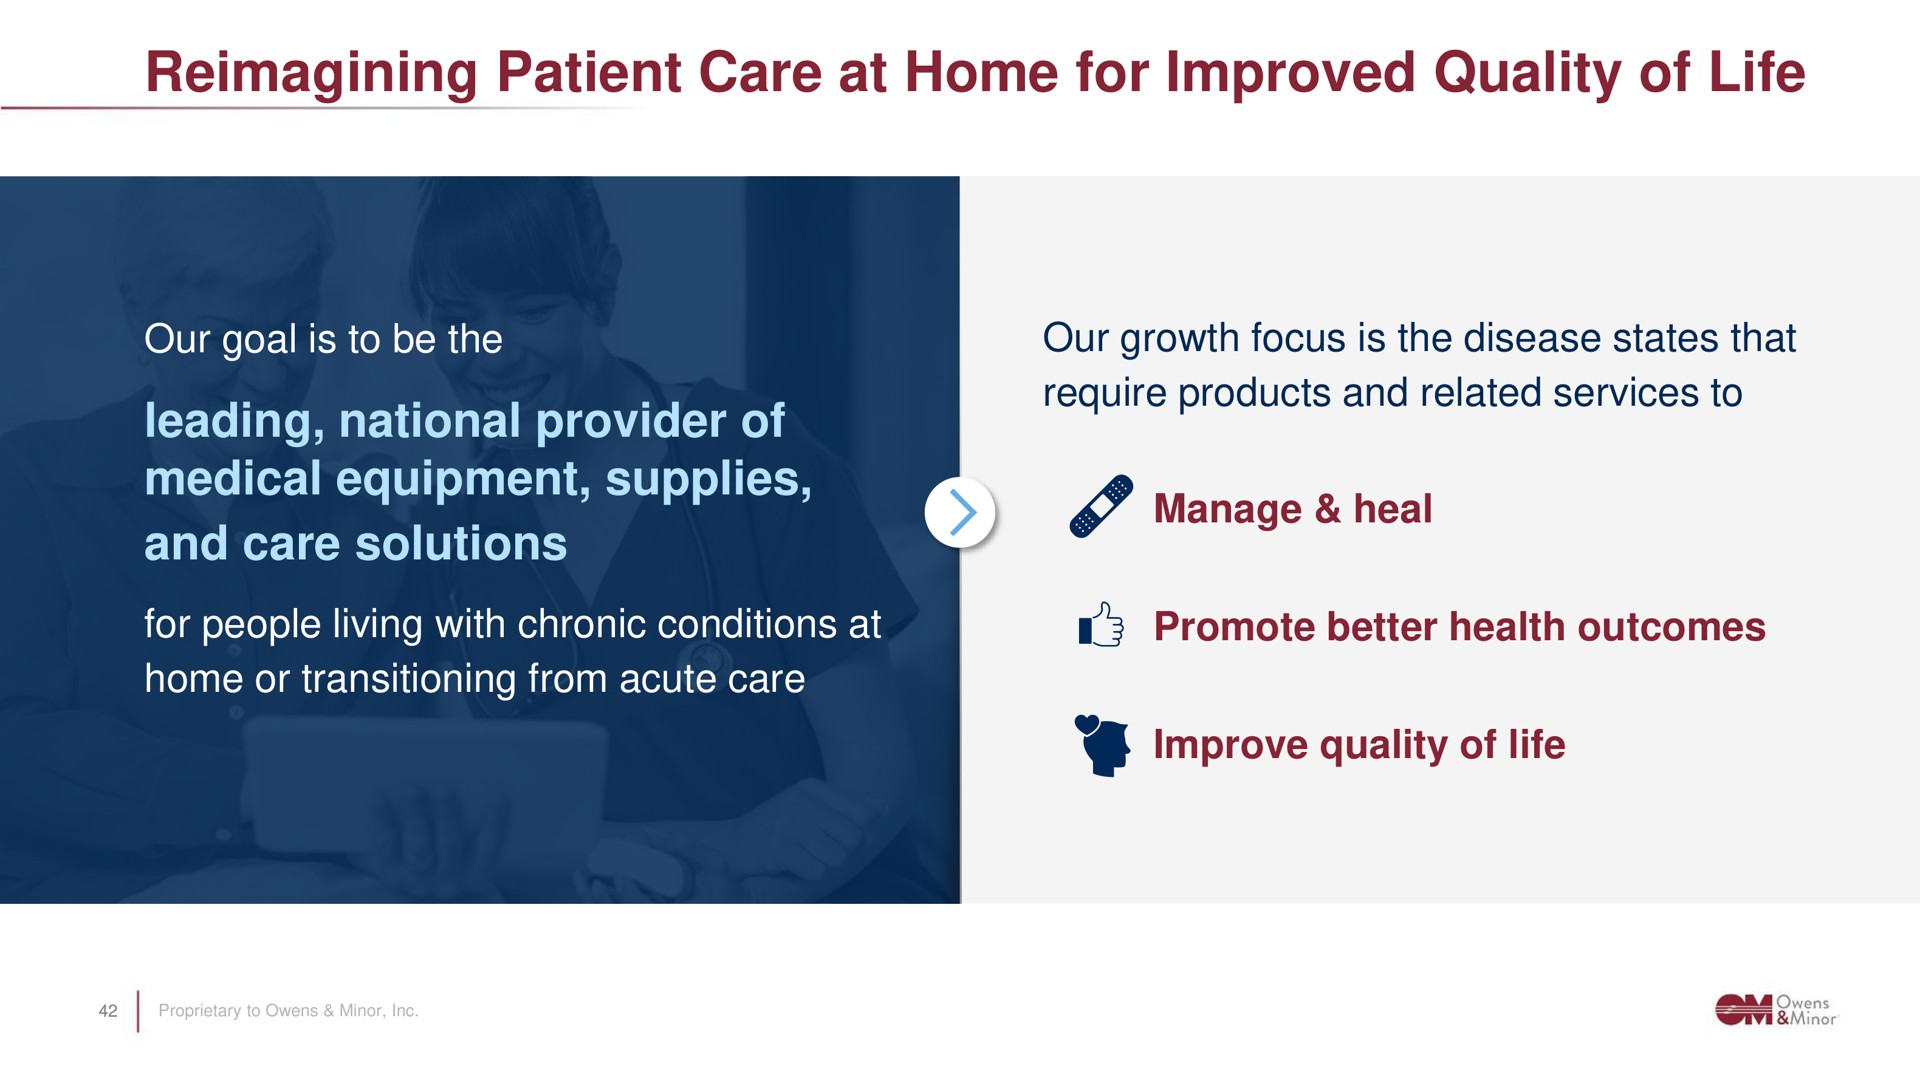 patient care at home for improved quality of life leading national provider of medical equipment supplies and care solutions manage heal | Owens&Minor